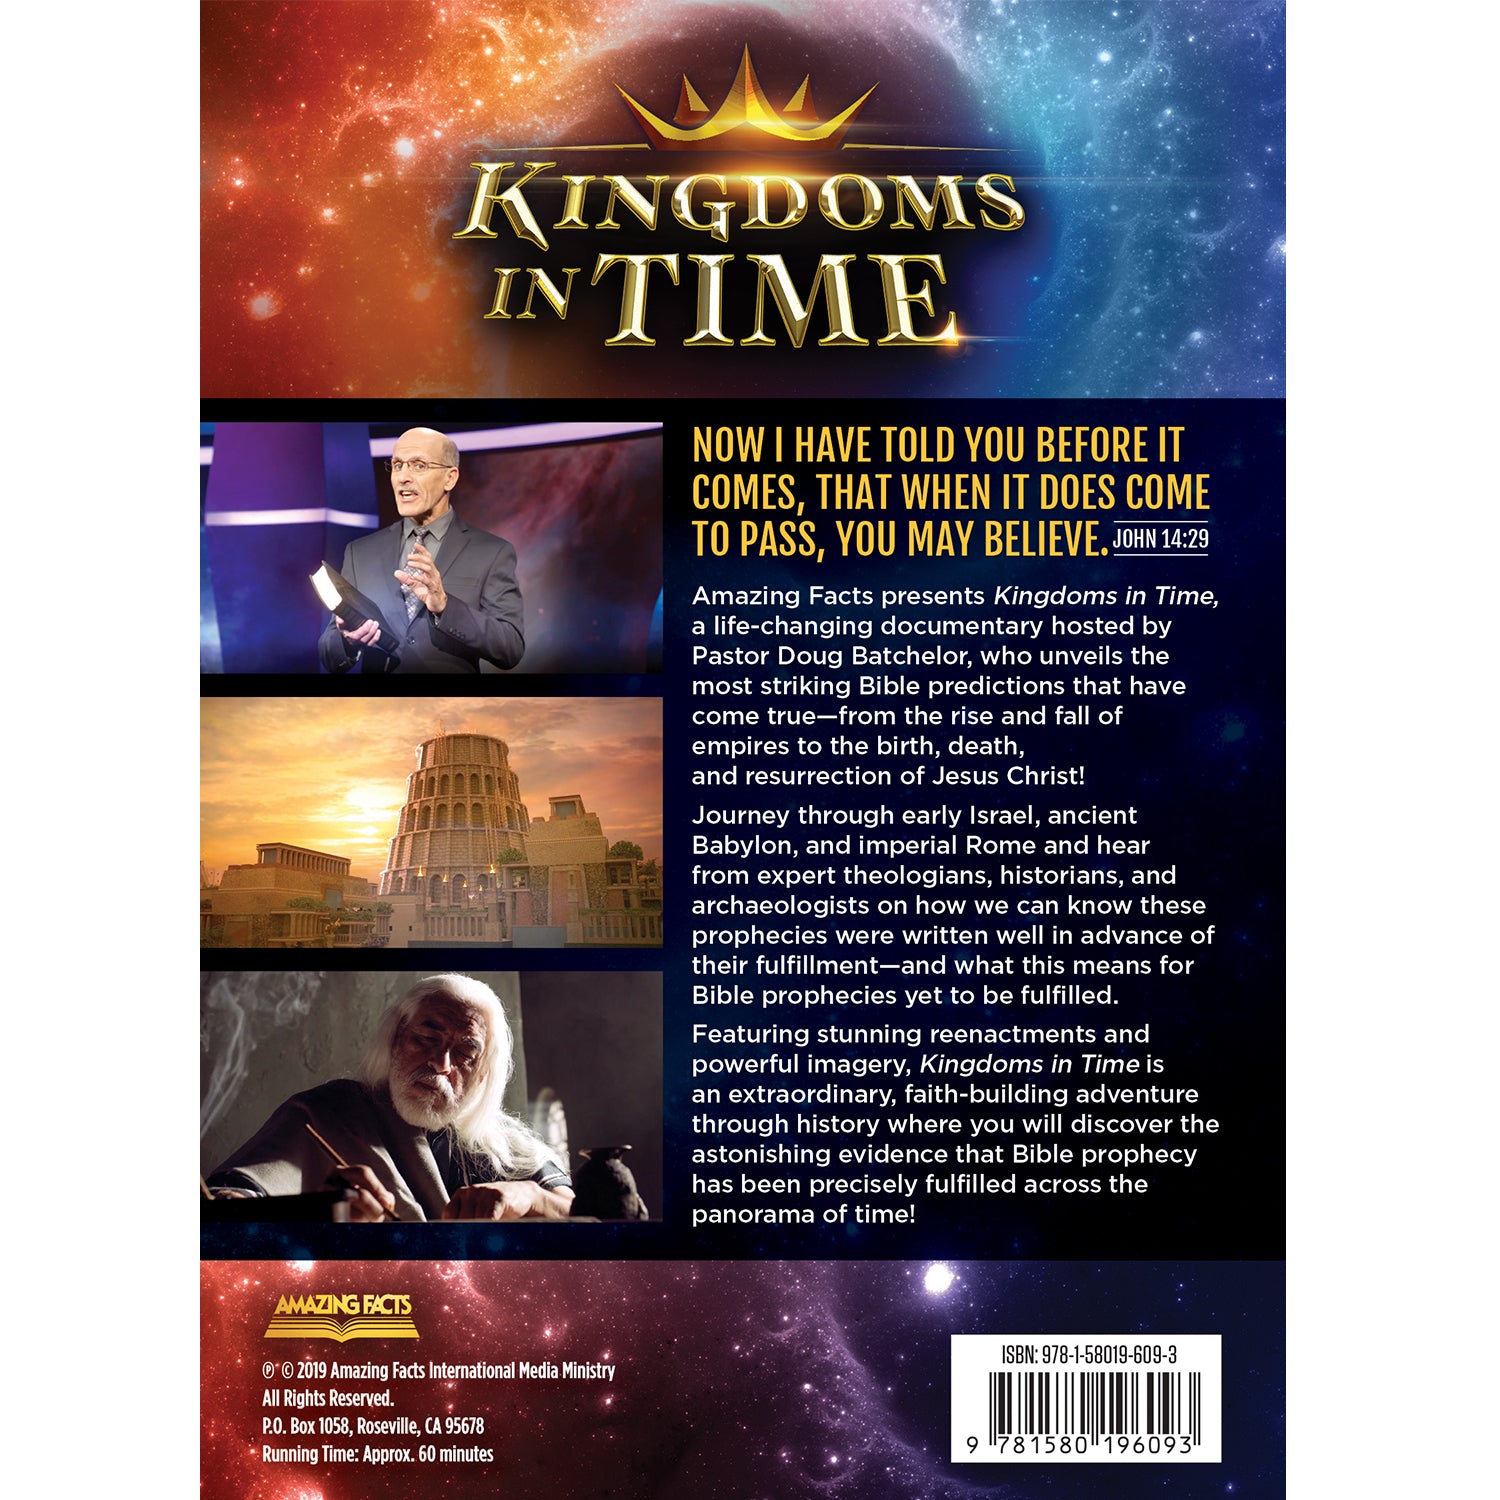 Kingdoms In Time DVD (Sharing Edition) by Pastor Doug Batchelor